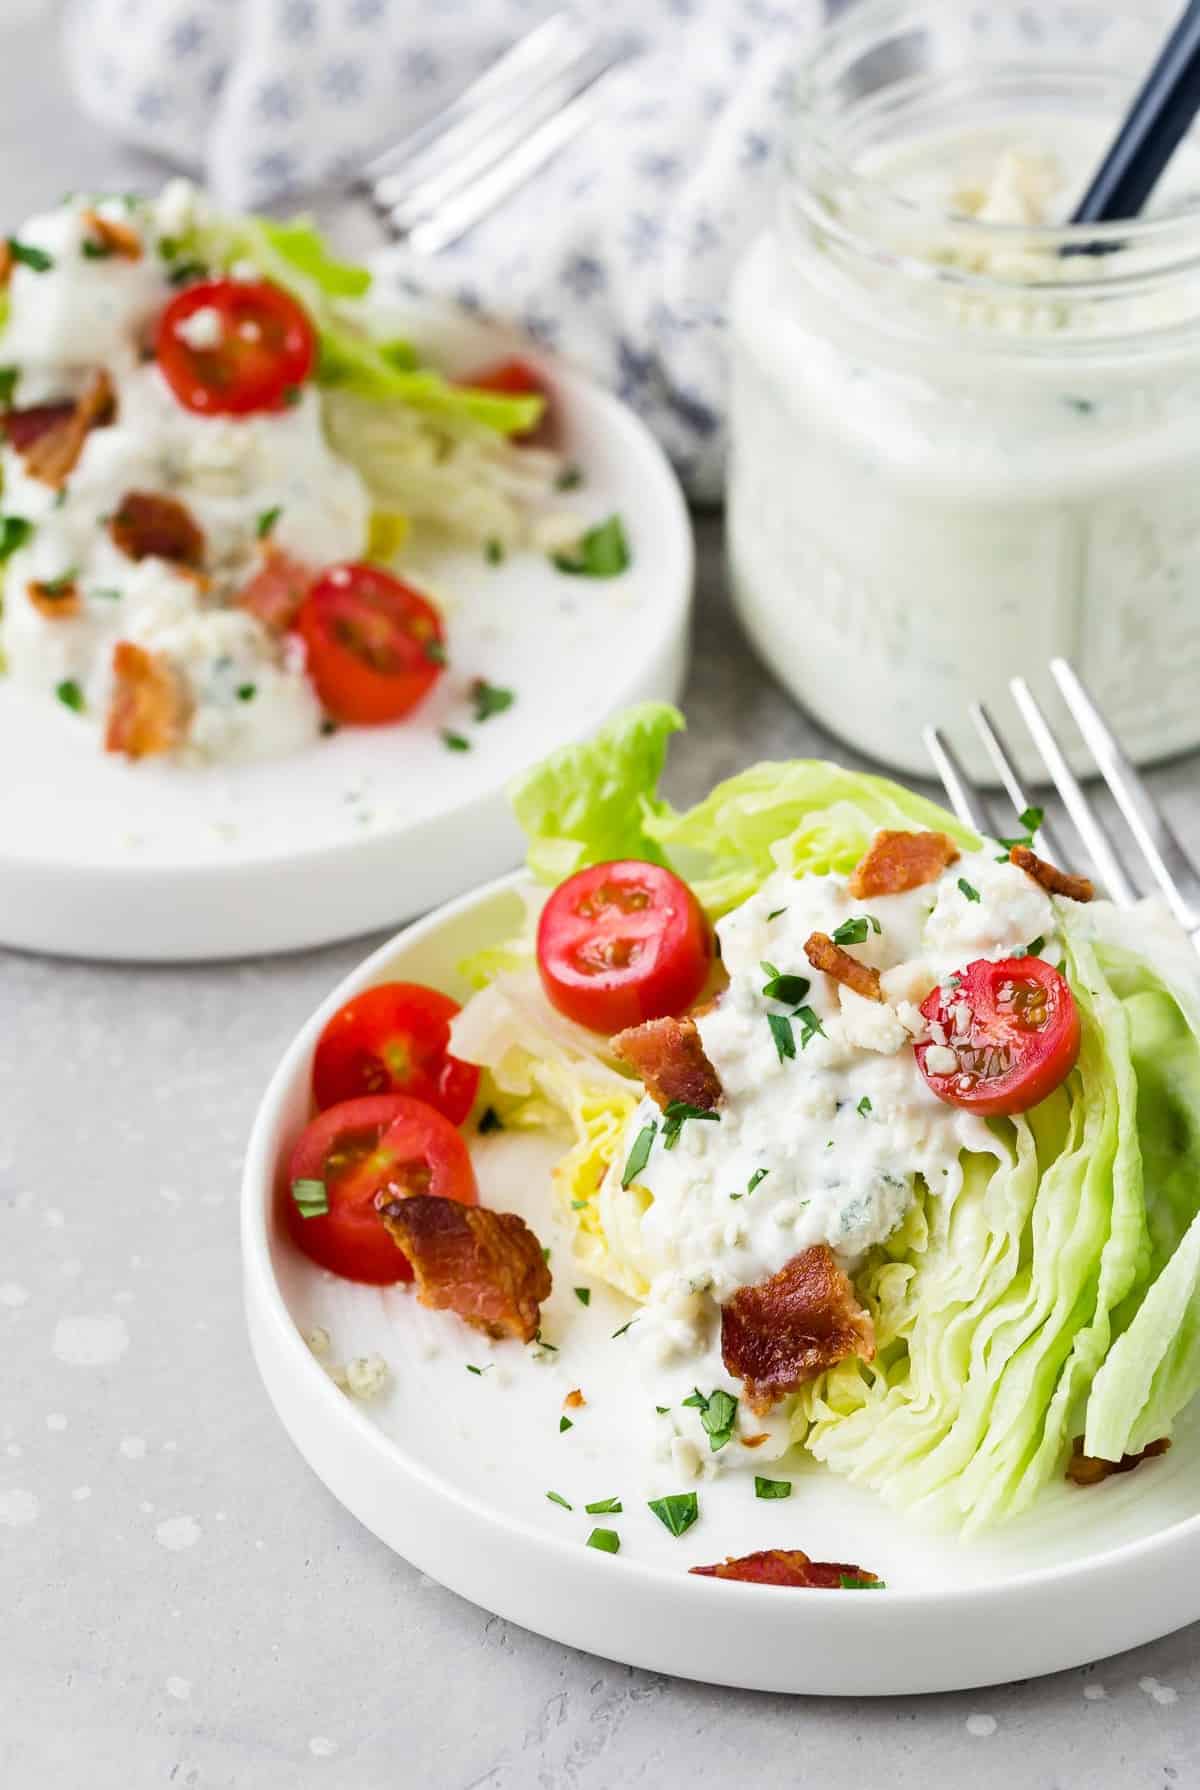 Two plates of salad with a jar of dressing in the background.